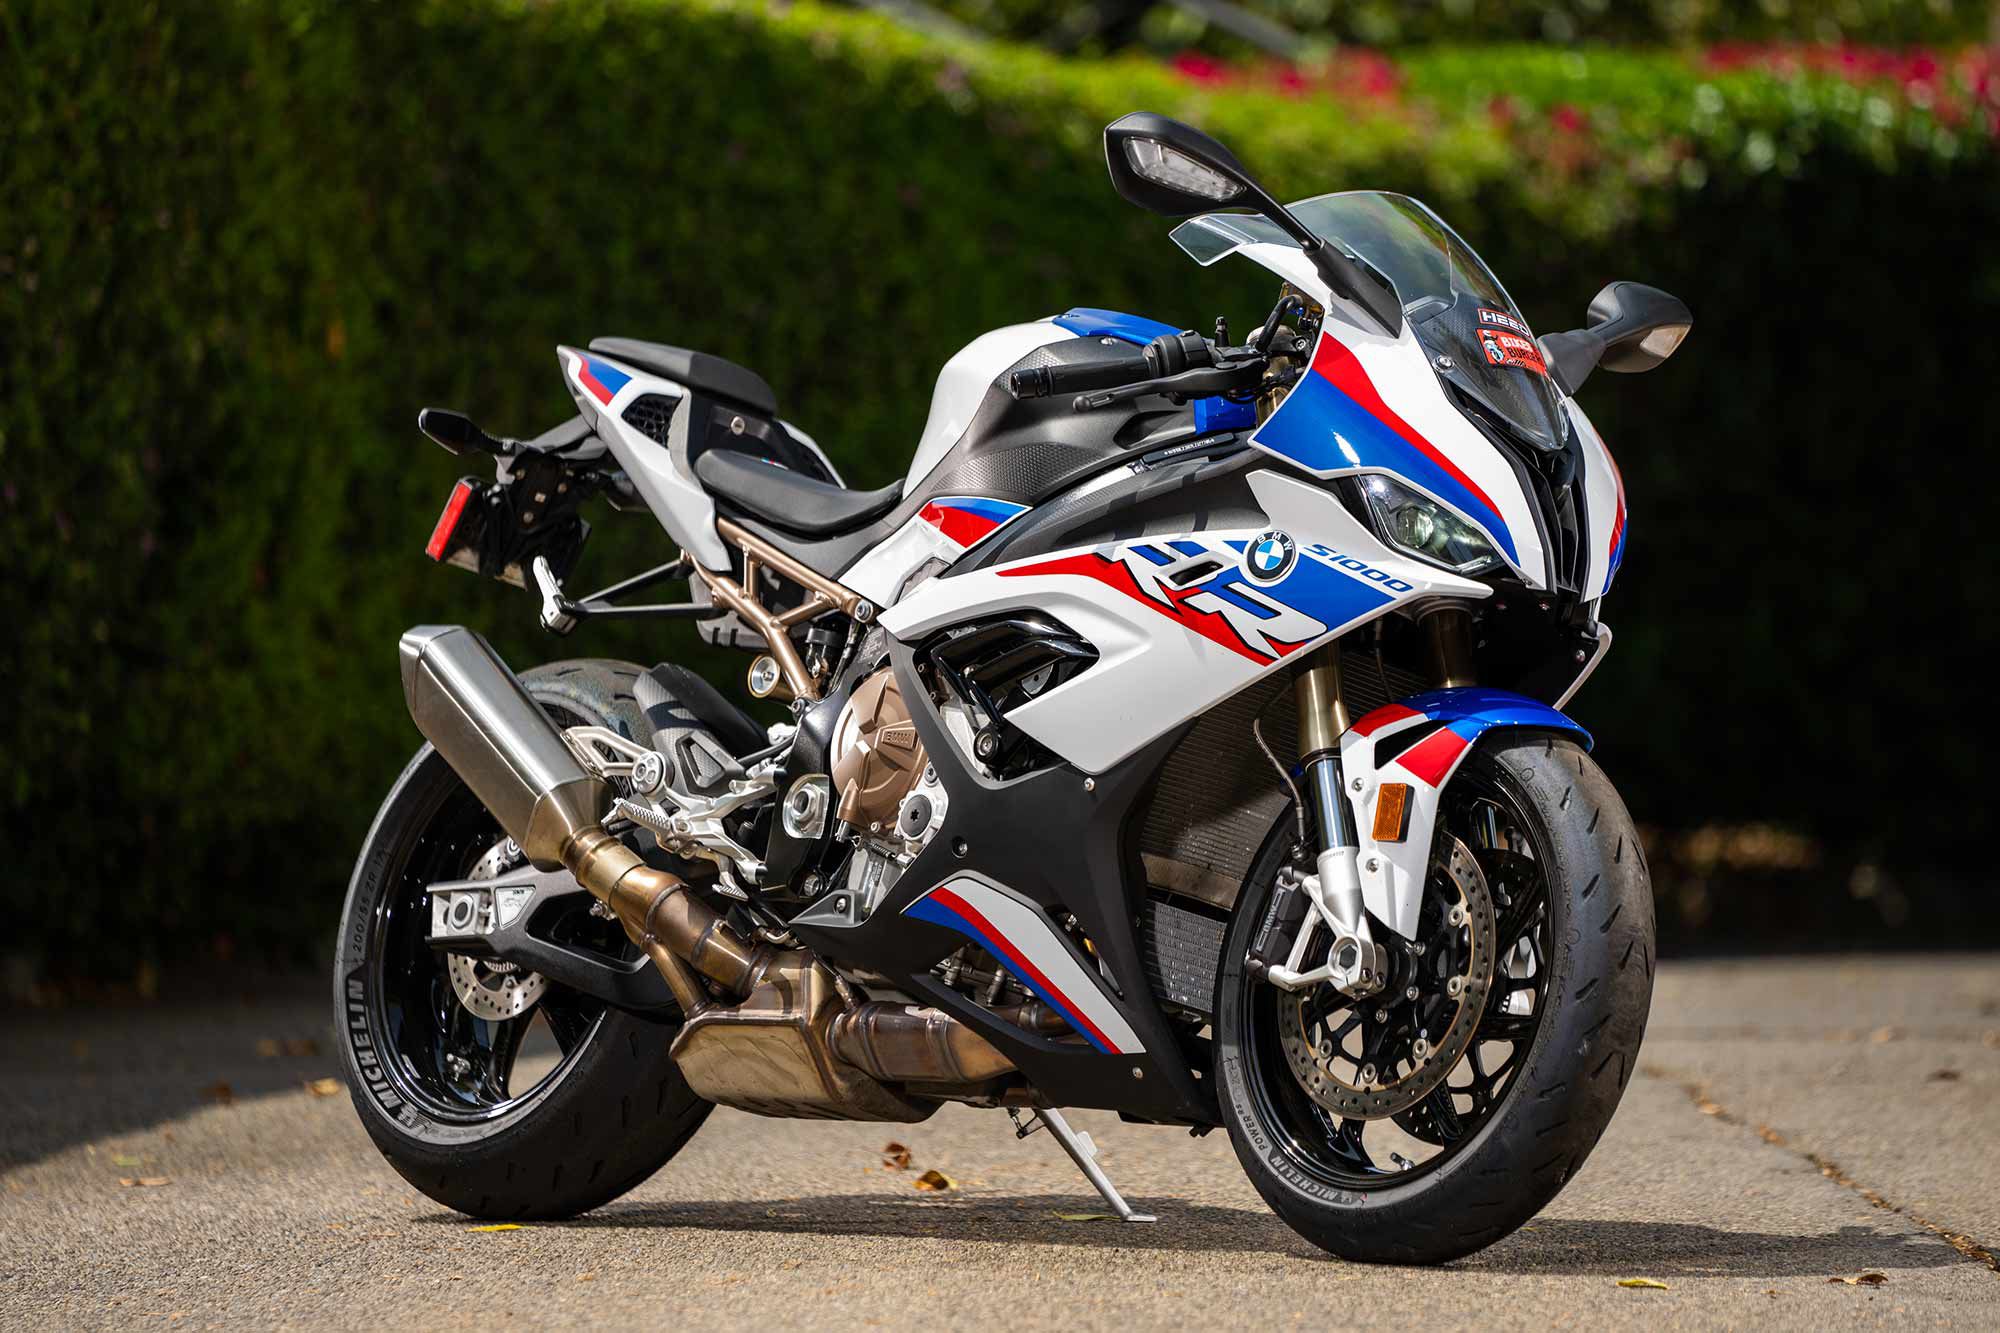 Value and BMW aren’t typically associated with one another. However it’s impressive how many features are offered on this $22,195 as tested S 1000 RR.